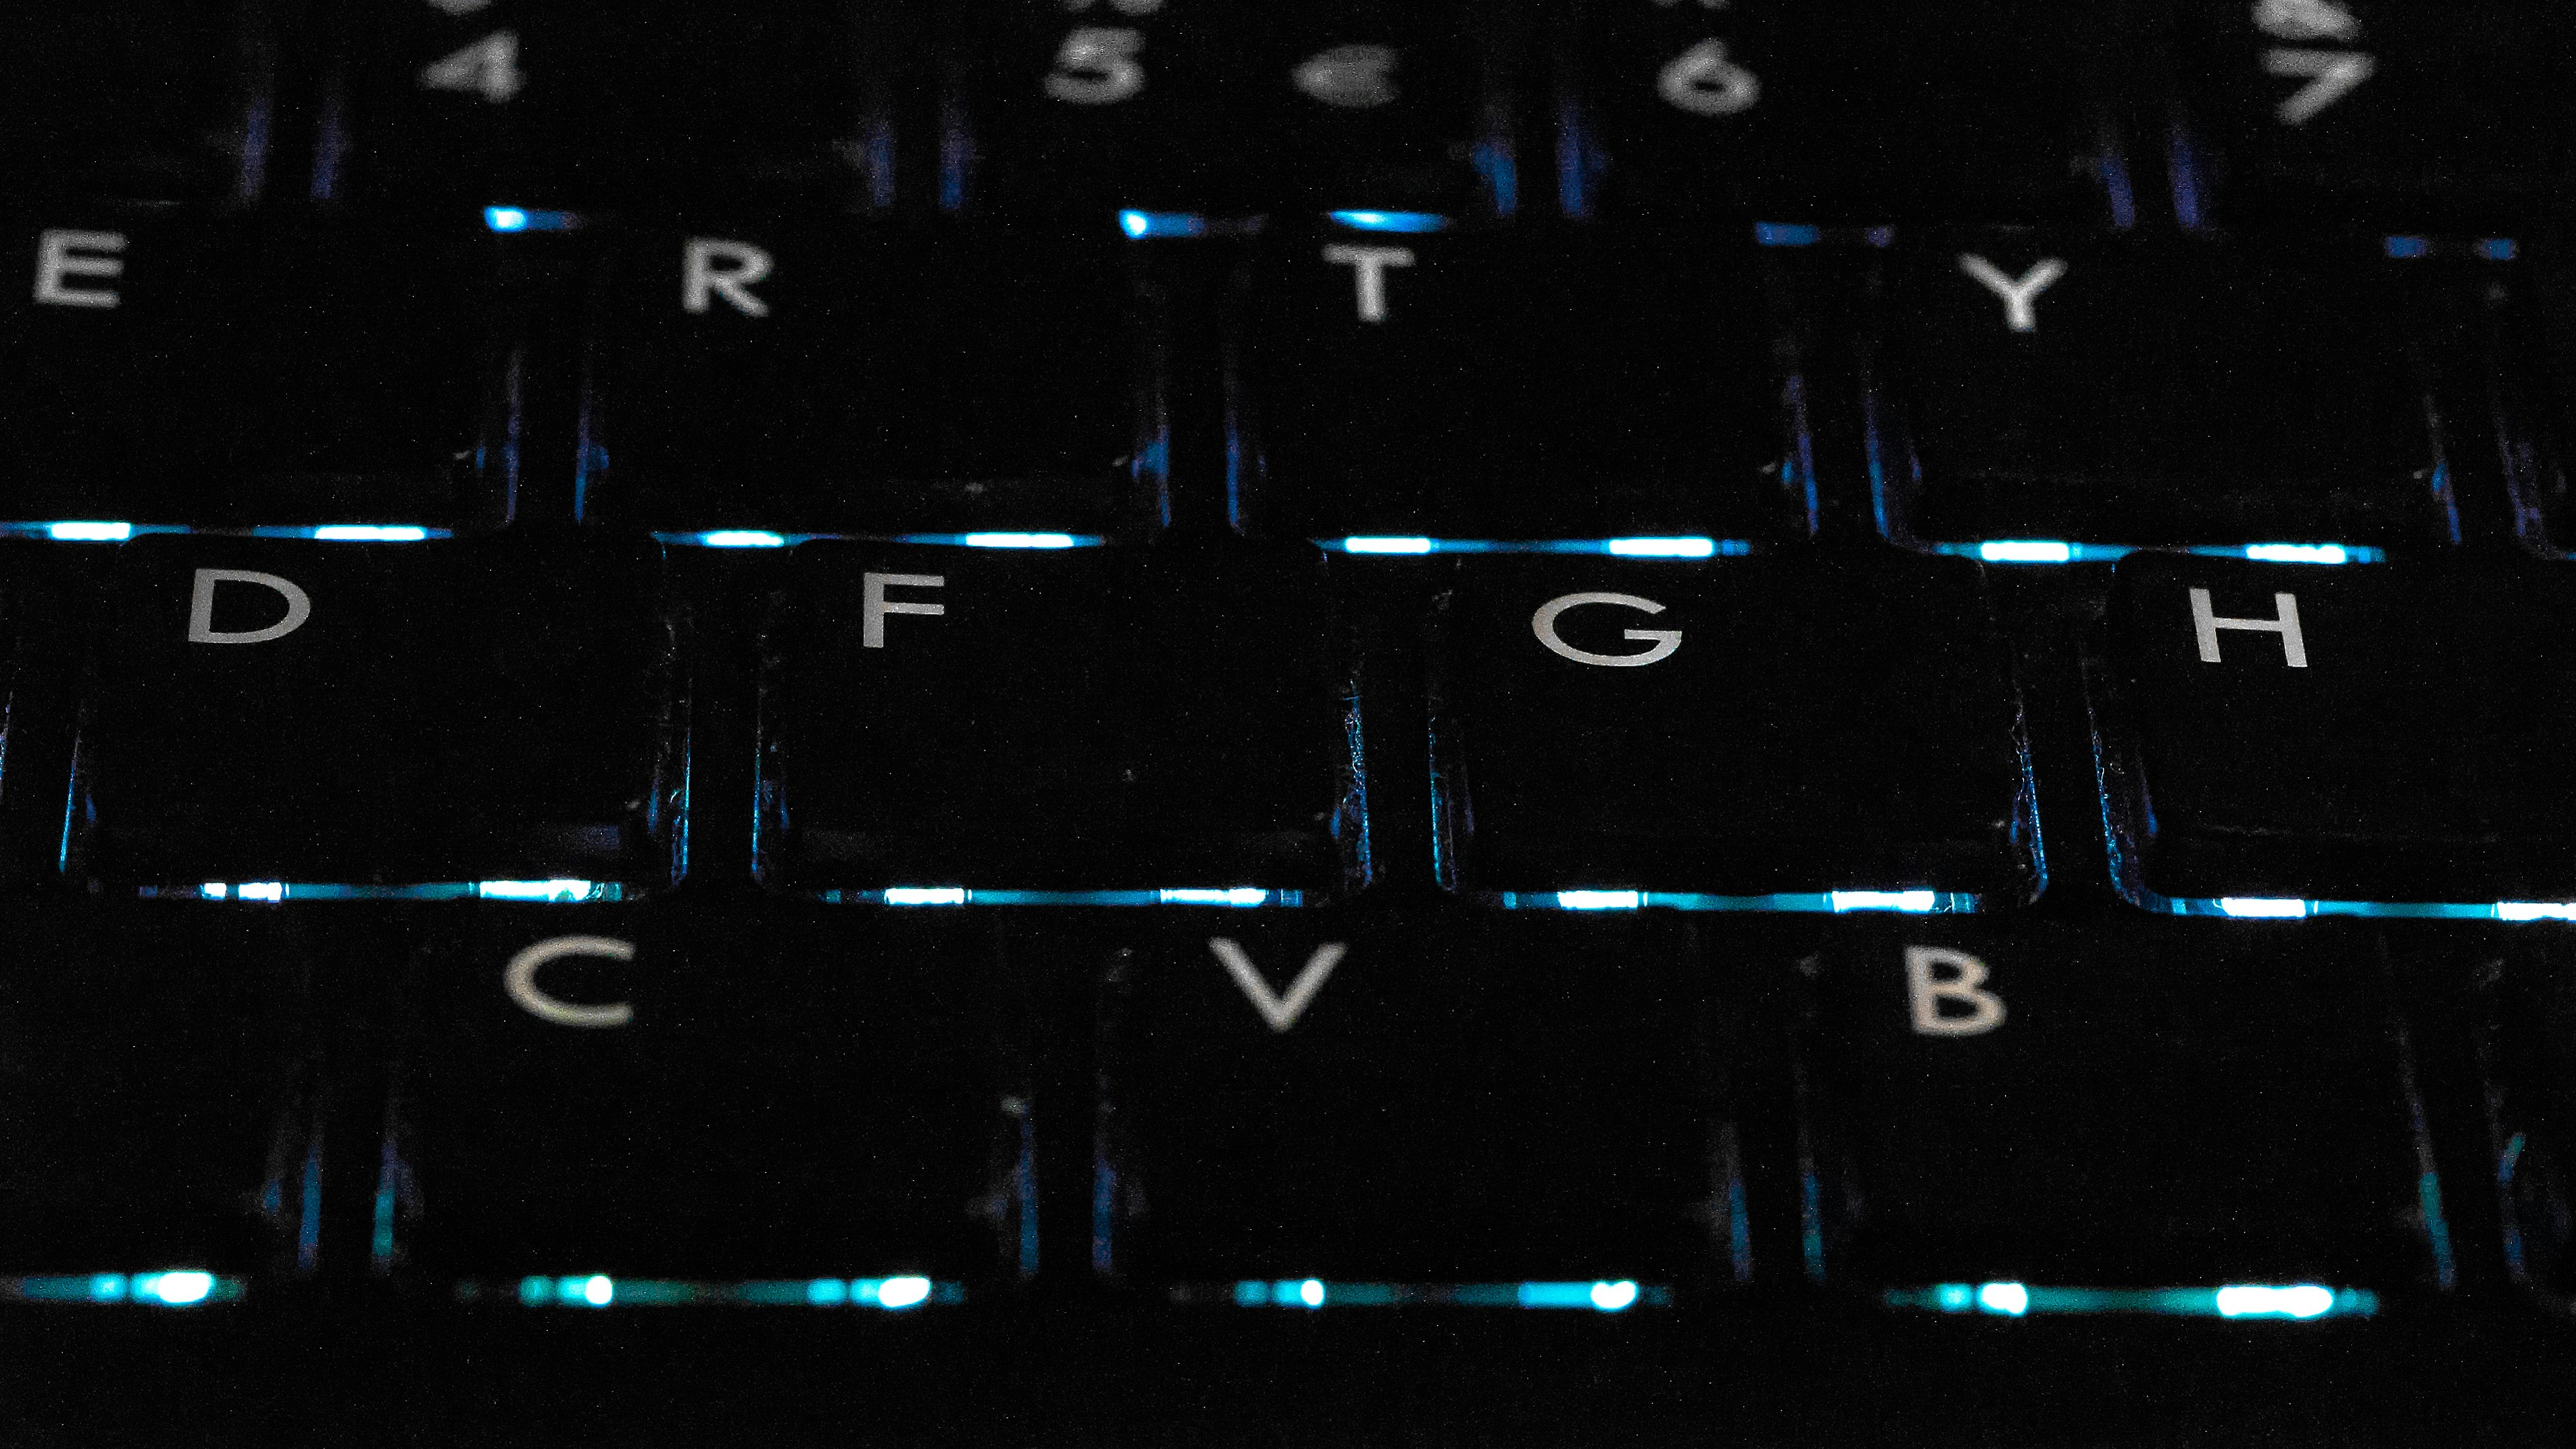 Laptop keyboard with lights